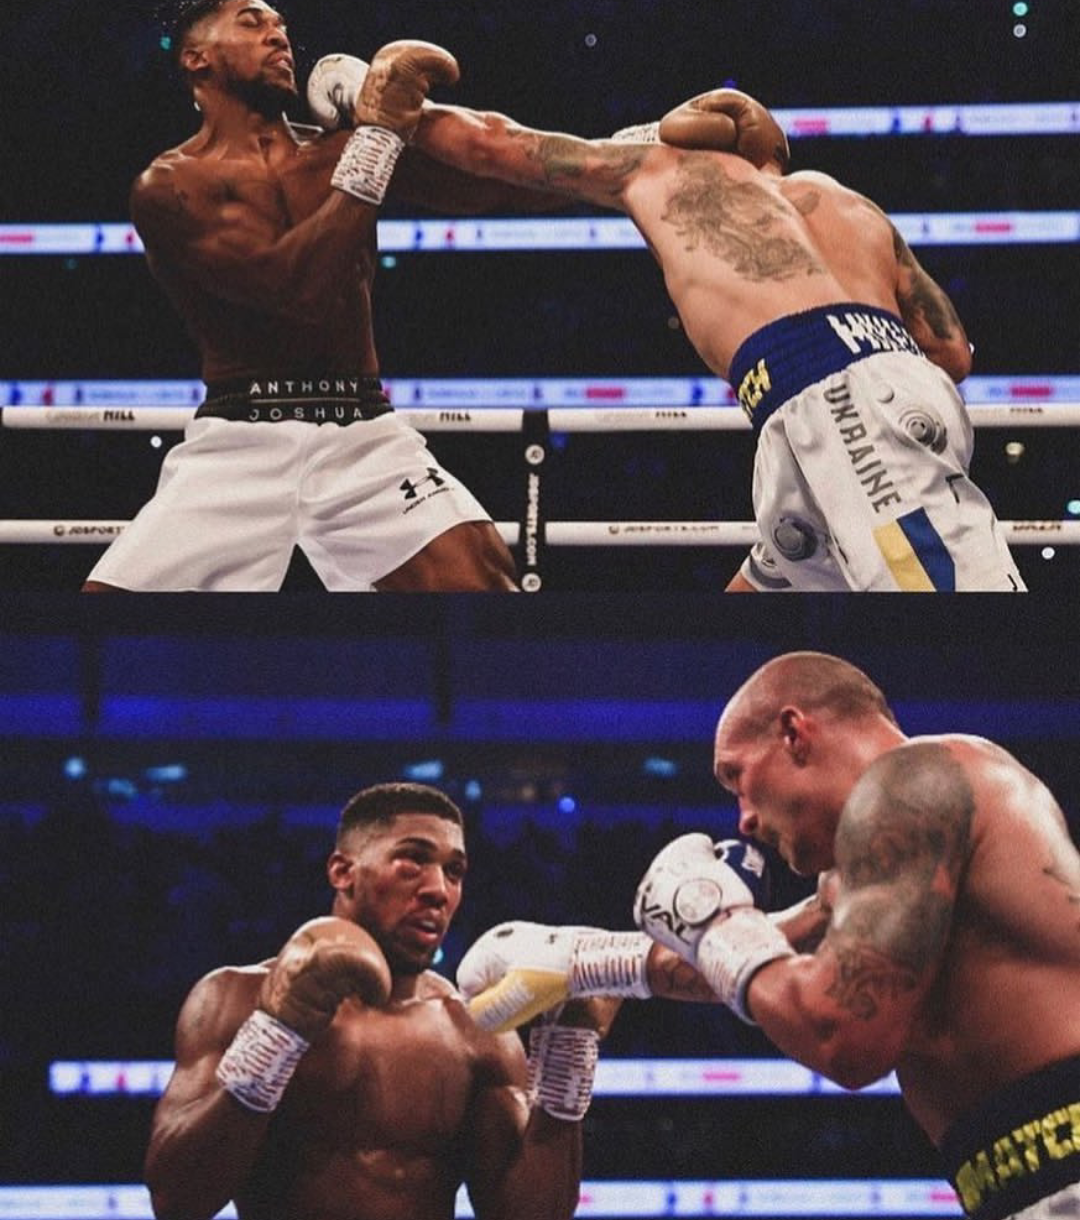 Anthony Joshua suffers second defeat of his career as Oleksandr Usyk beat him in London to become new heavyweight champion (photos)